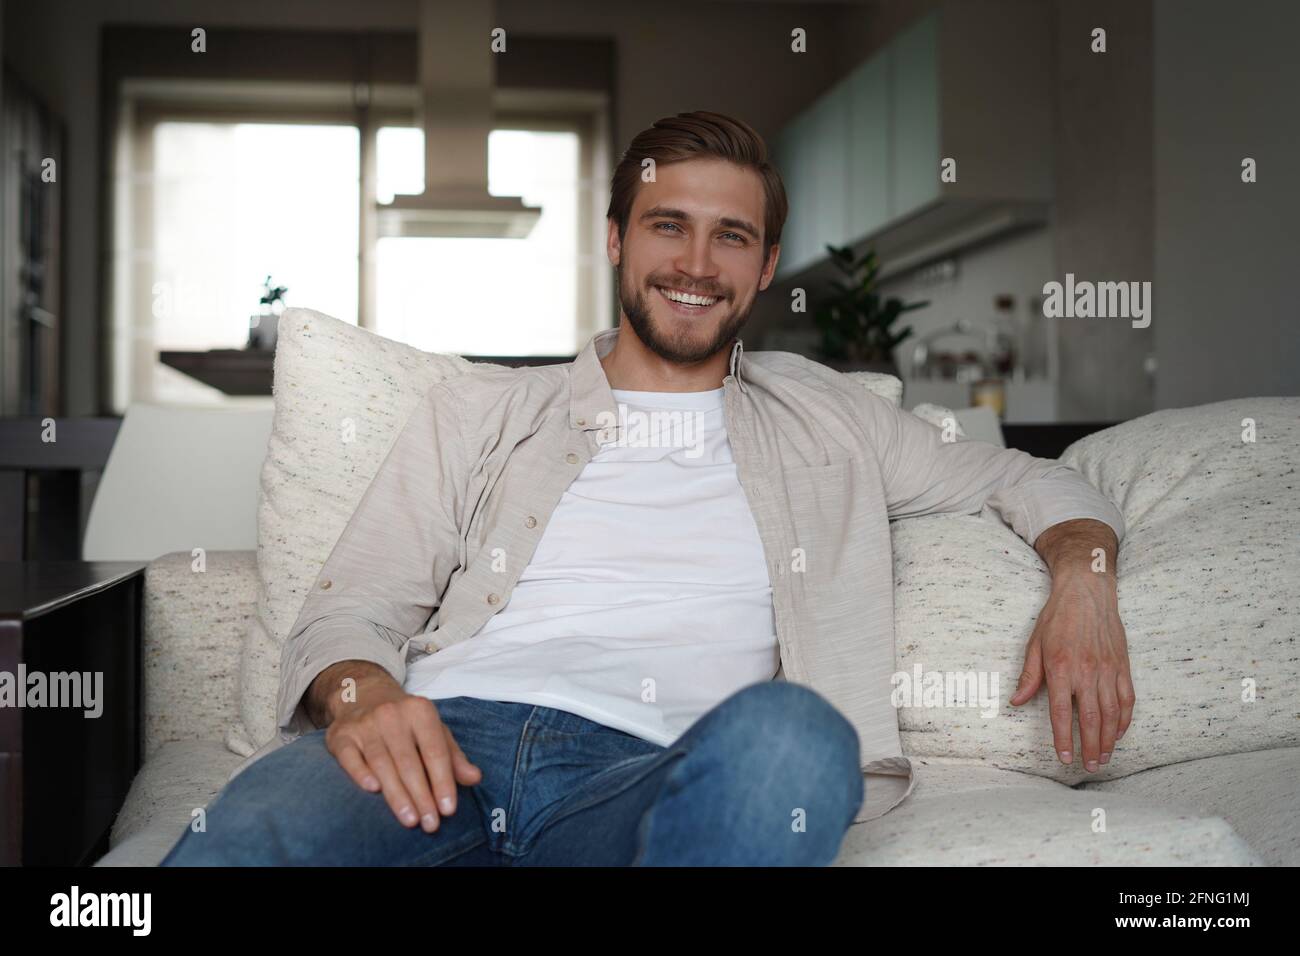 Middle-aged man having a restful moment relaxing in sofa. Stock Photo